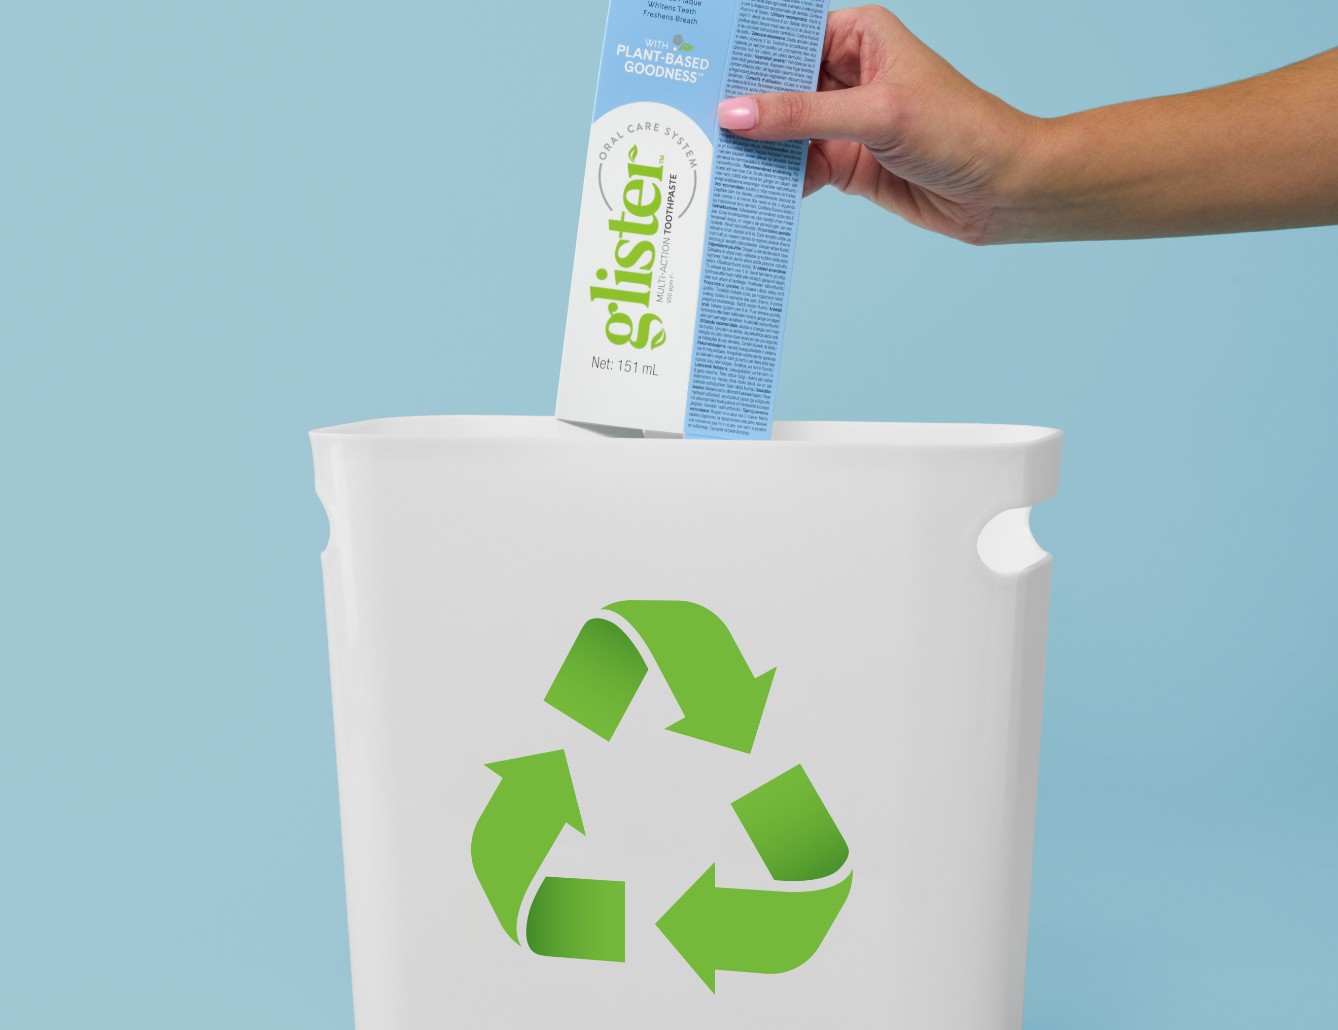 comes with recyclable paper and carton for sustainability